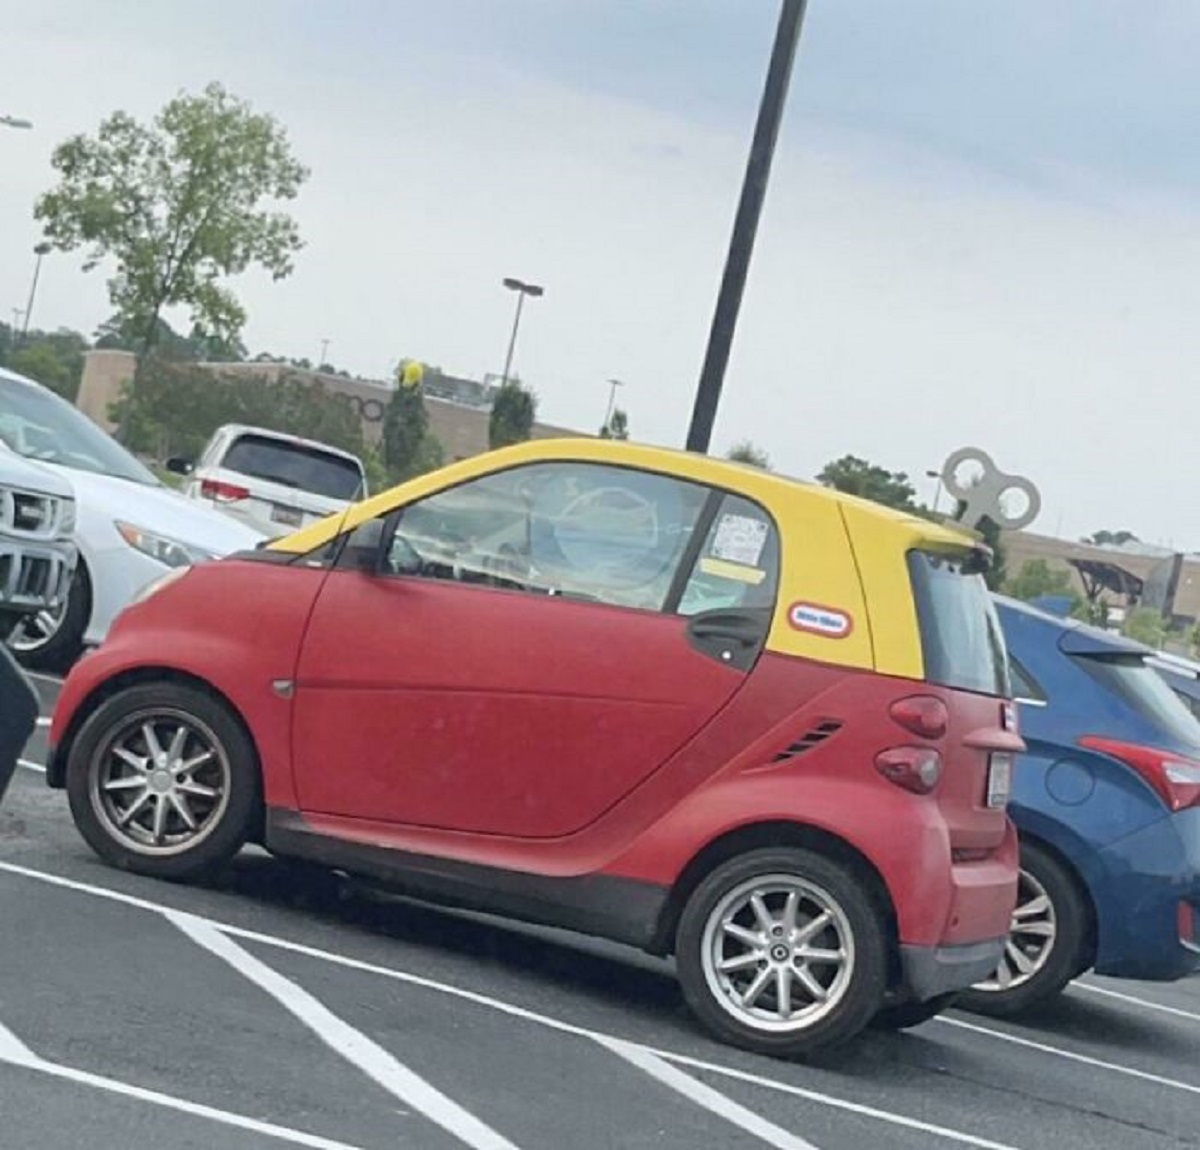 "Saw This Adult Sized Little Tikes Car In The Parking Lot"